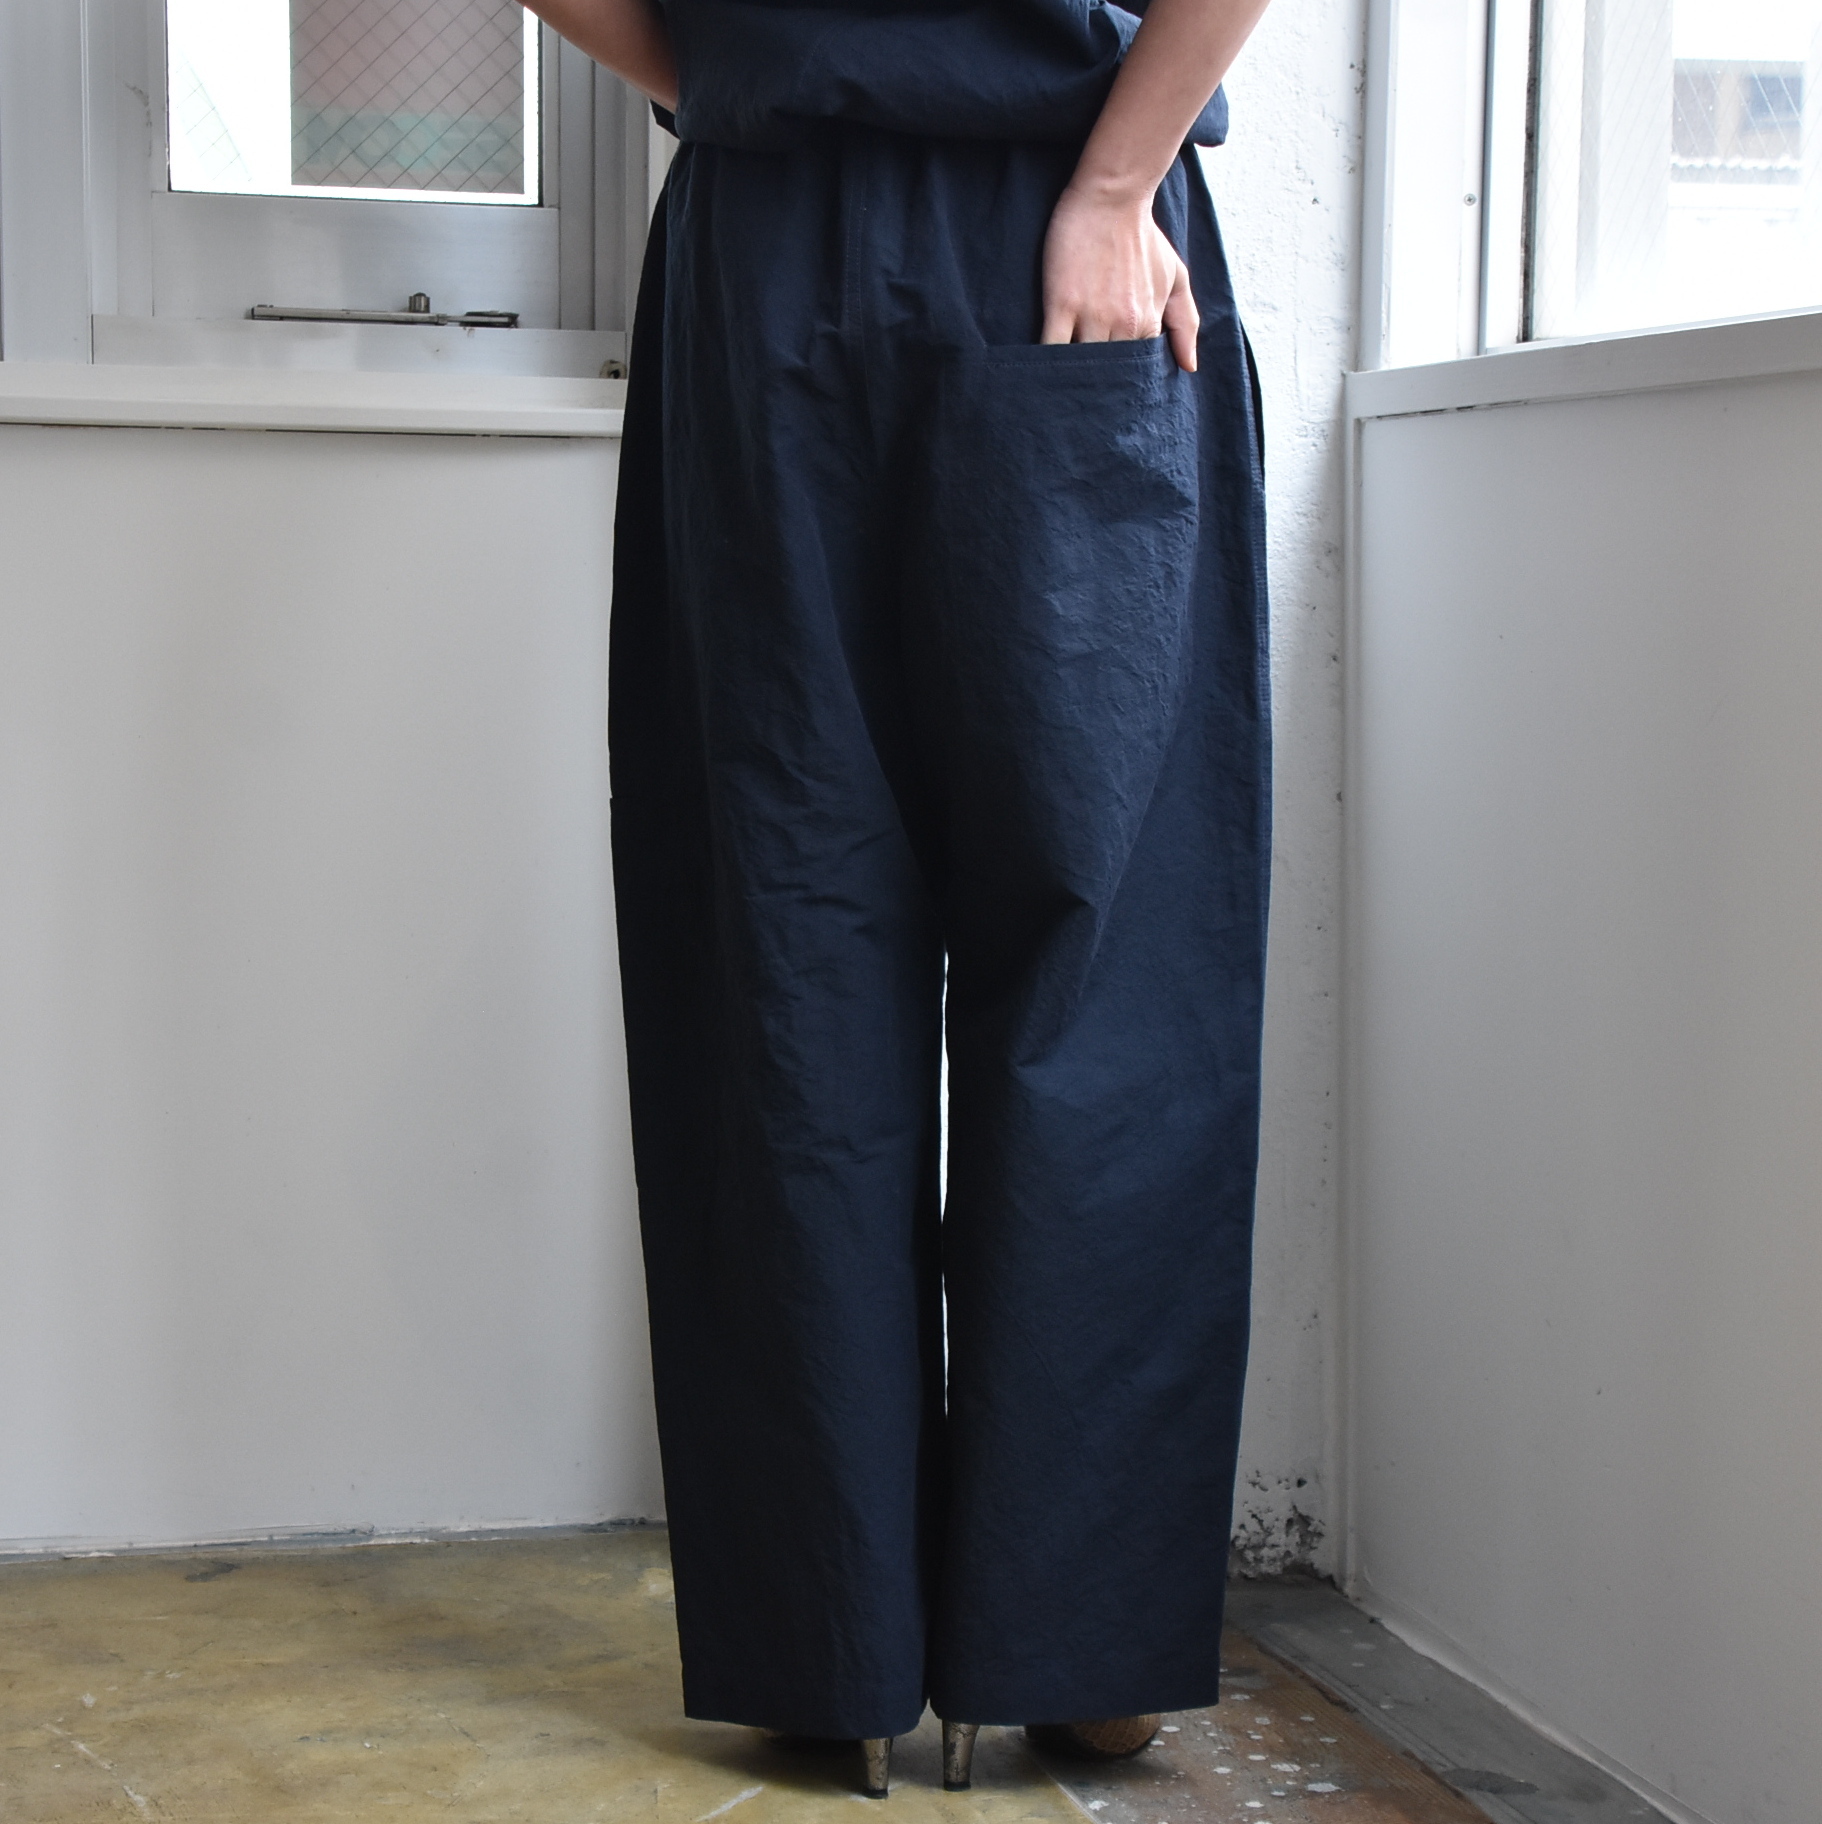 y30% off salezSOFIE D'HOORE(\tB[h[) / Wide pants with elastic waist thigh pockety2FWJz#PLUCK-AA(6)